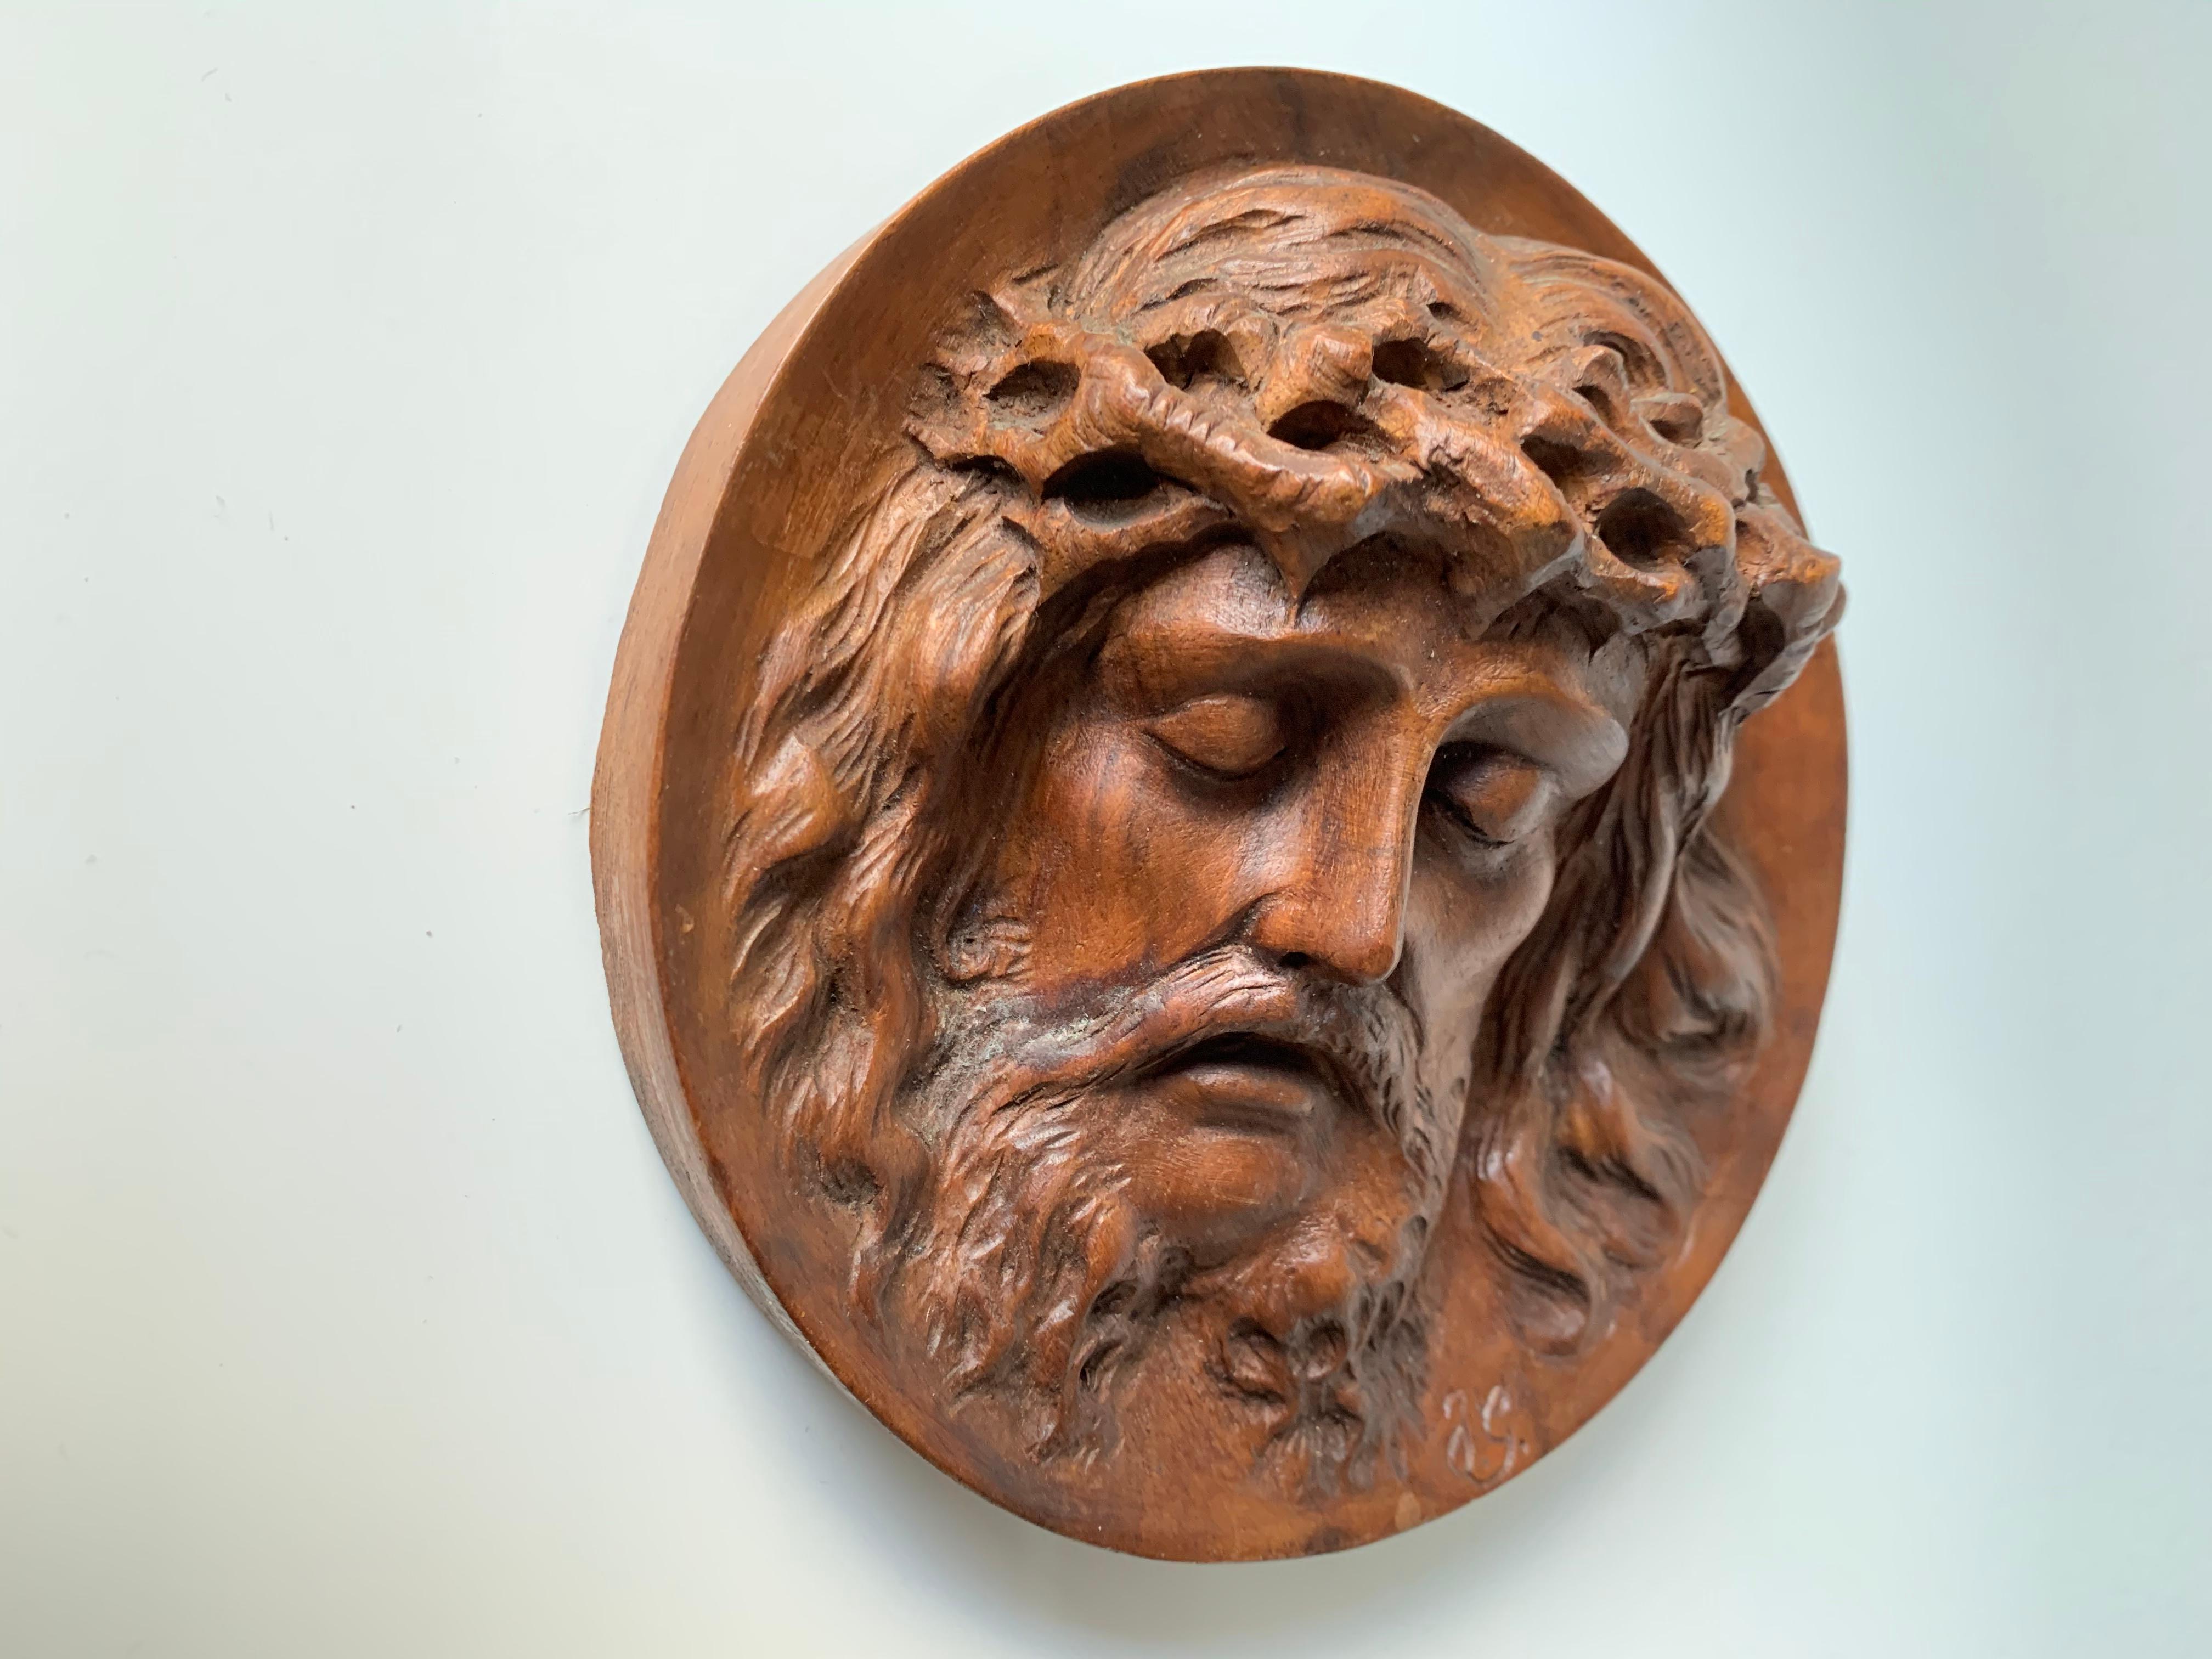 European Unique and Finely Hand Carved, 19th Century Christ Mask Medallion / Round Plaque